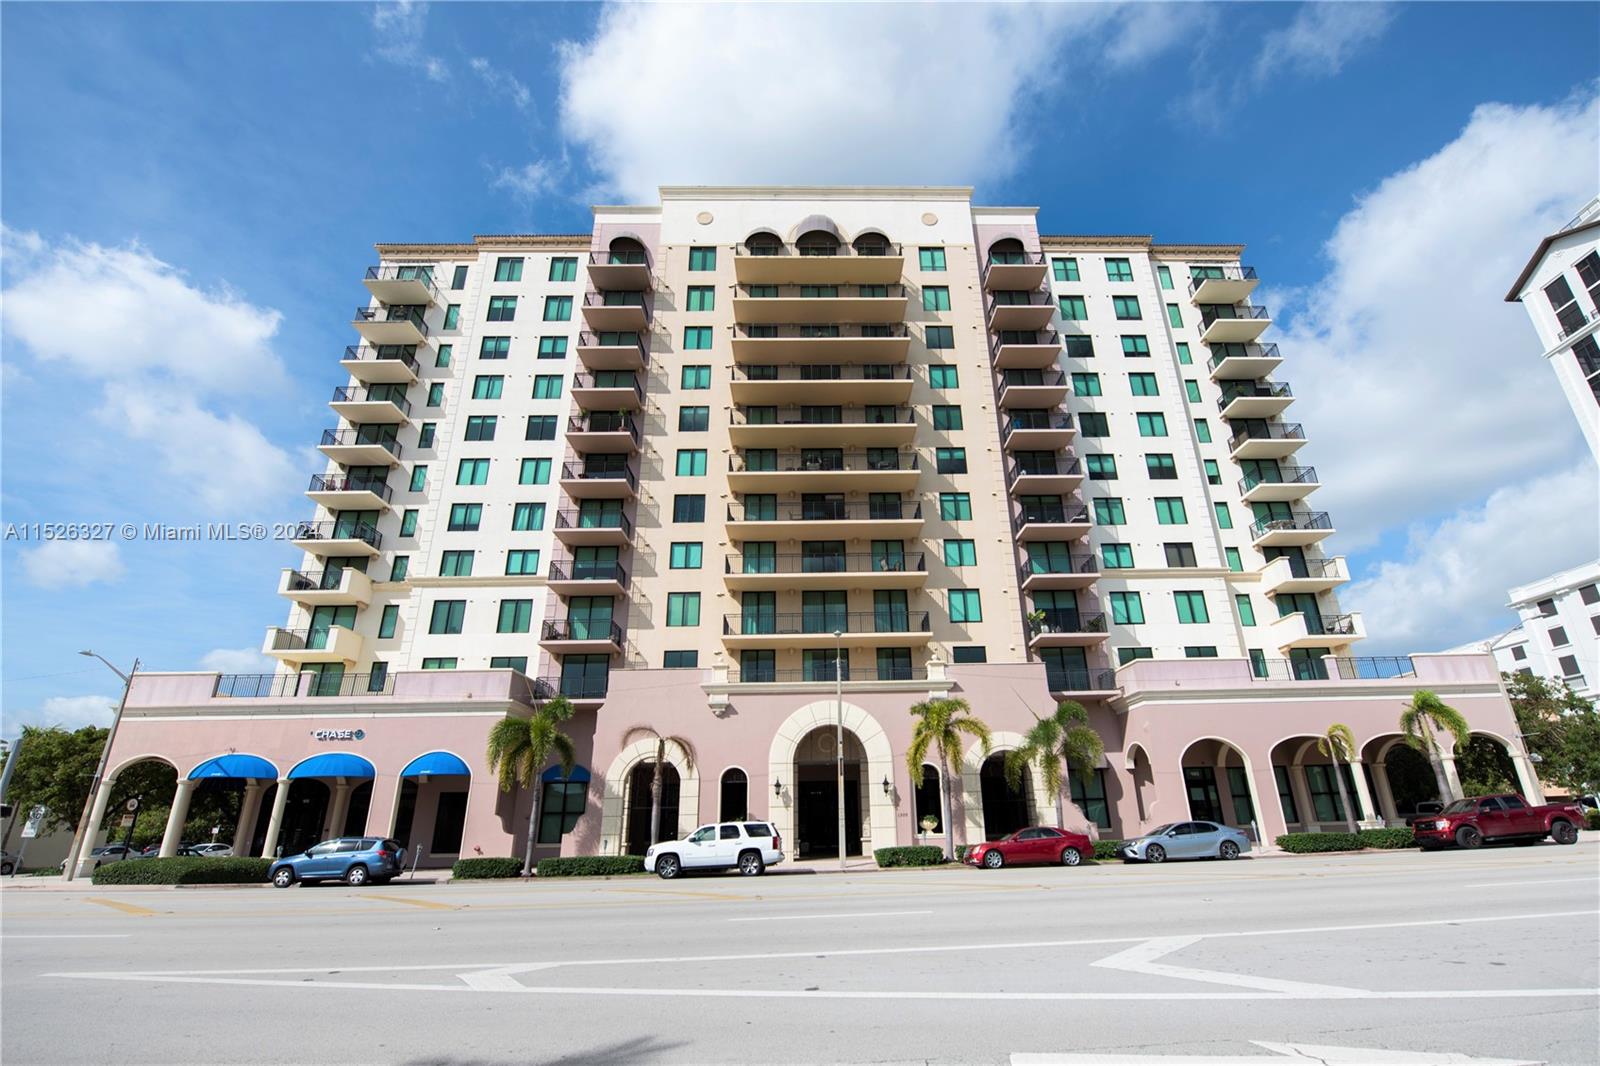 Spacious condo located in the heart of Coral Gables, just blocks away from Miracle Mile and right on Ponce de Leon. Enjoy a beautiful view of downtown Brickell. Minutes from Merrick Park and within walking distance to shops, restaurants, and more. Conveniently close to the airport. This condo features an spacious balcony, wood cabinets in the kitchen and bathrooms, granite countertops in the kitchen, marble countertops in the bathrooms, and all stainless-steel kitchen appliances. Includes 2 assigned parking spaces. An exceptional location offering a blend of luxury and convenience.